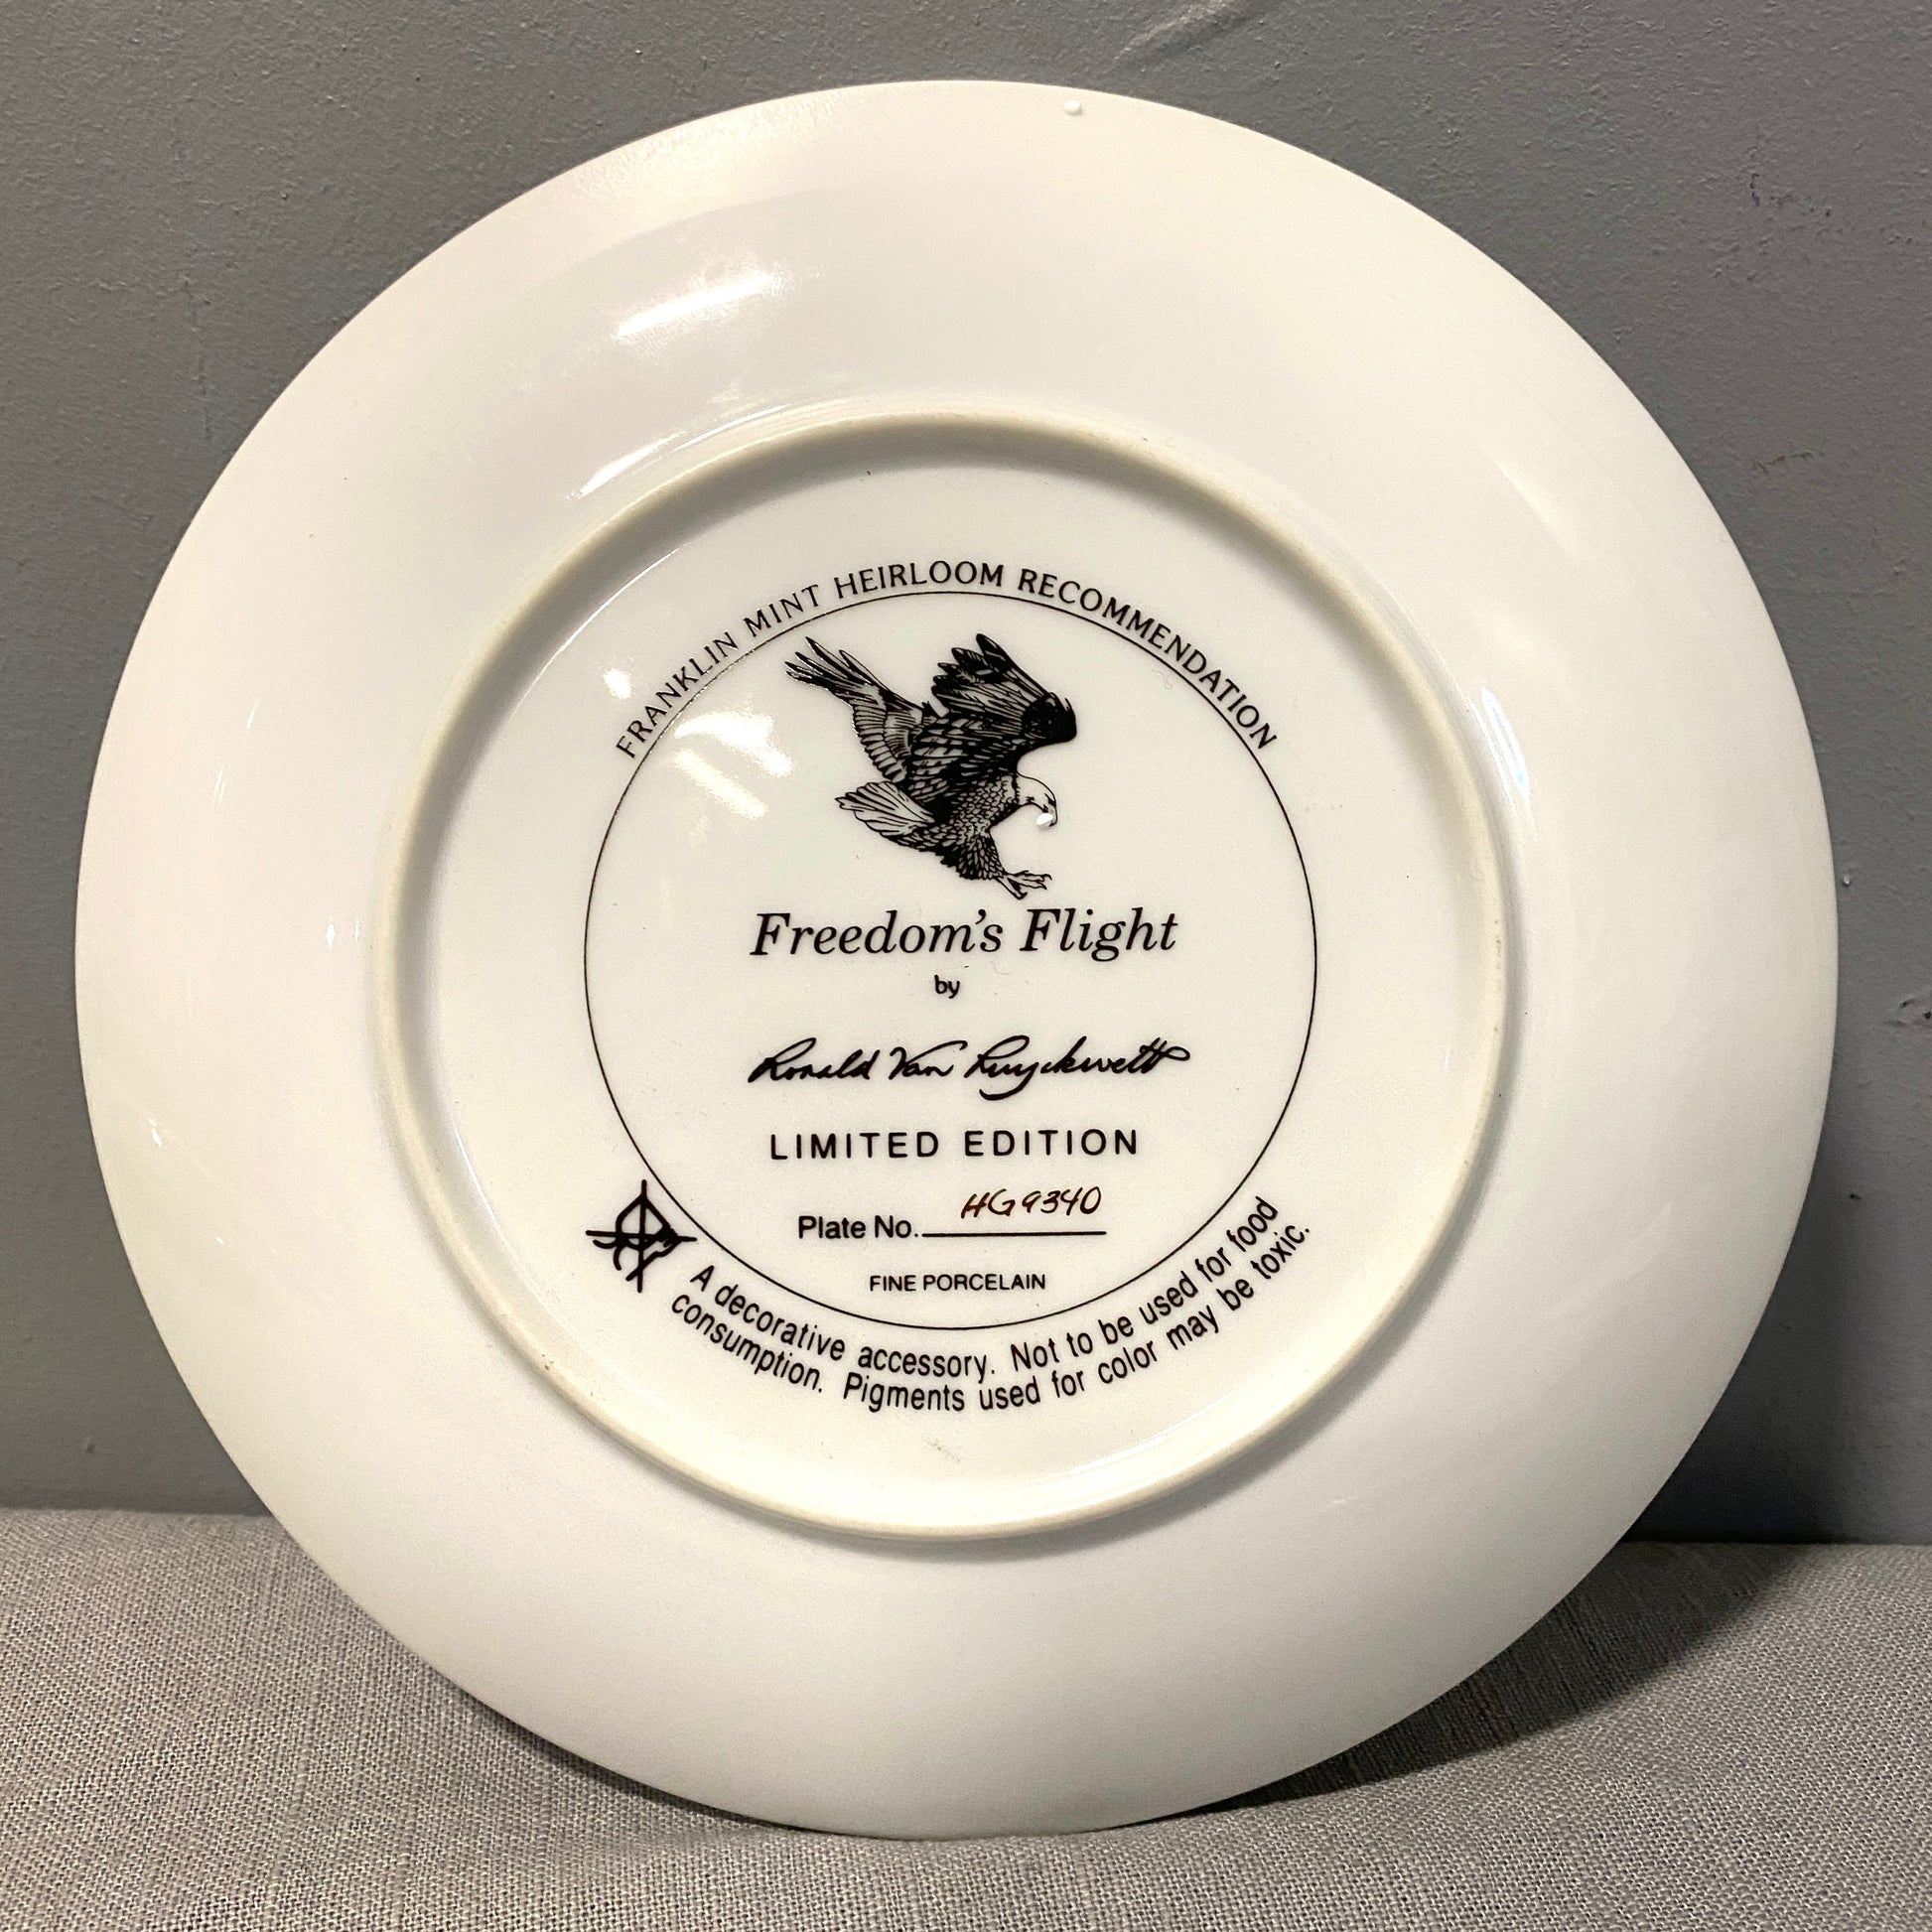 'Freedom's Flight' collector plate for sale in Calgary, Alberta.